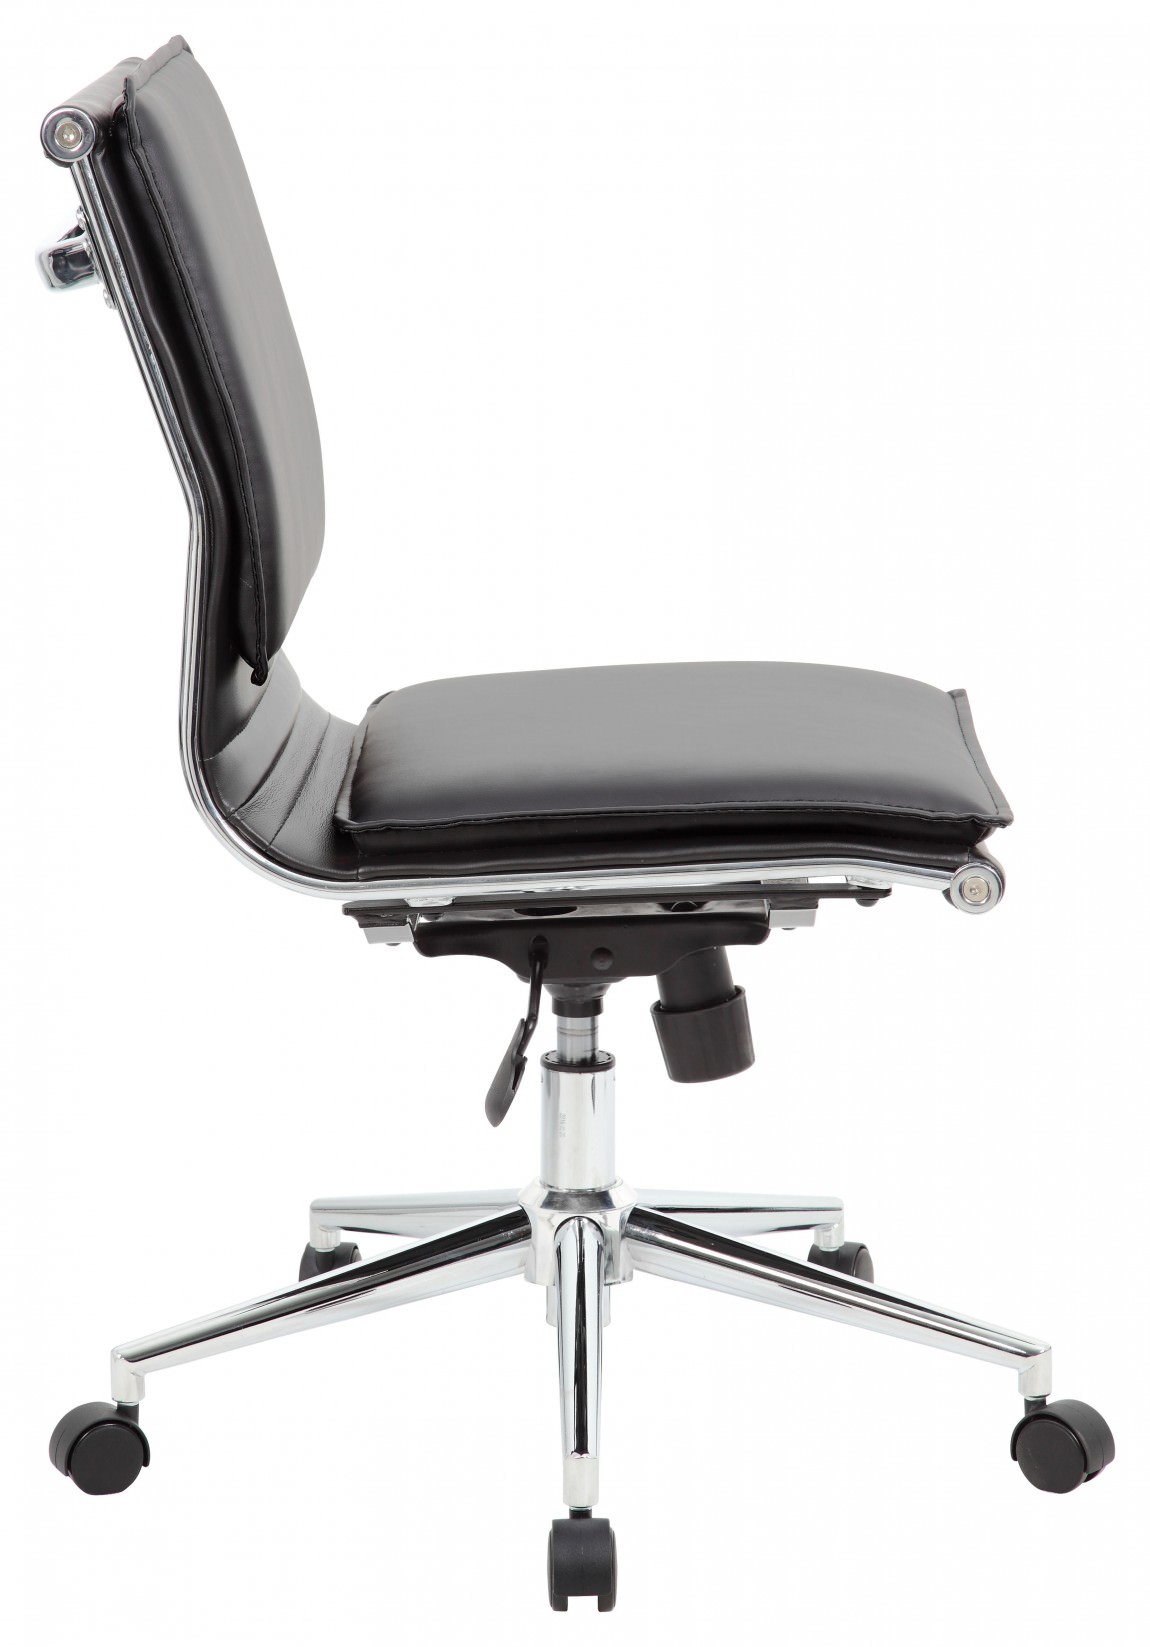 Armless Conference Room Chair